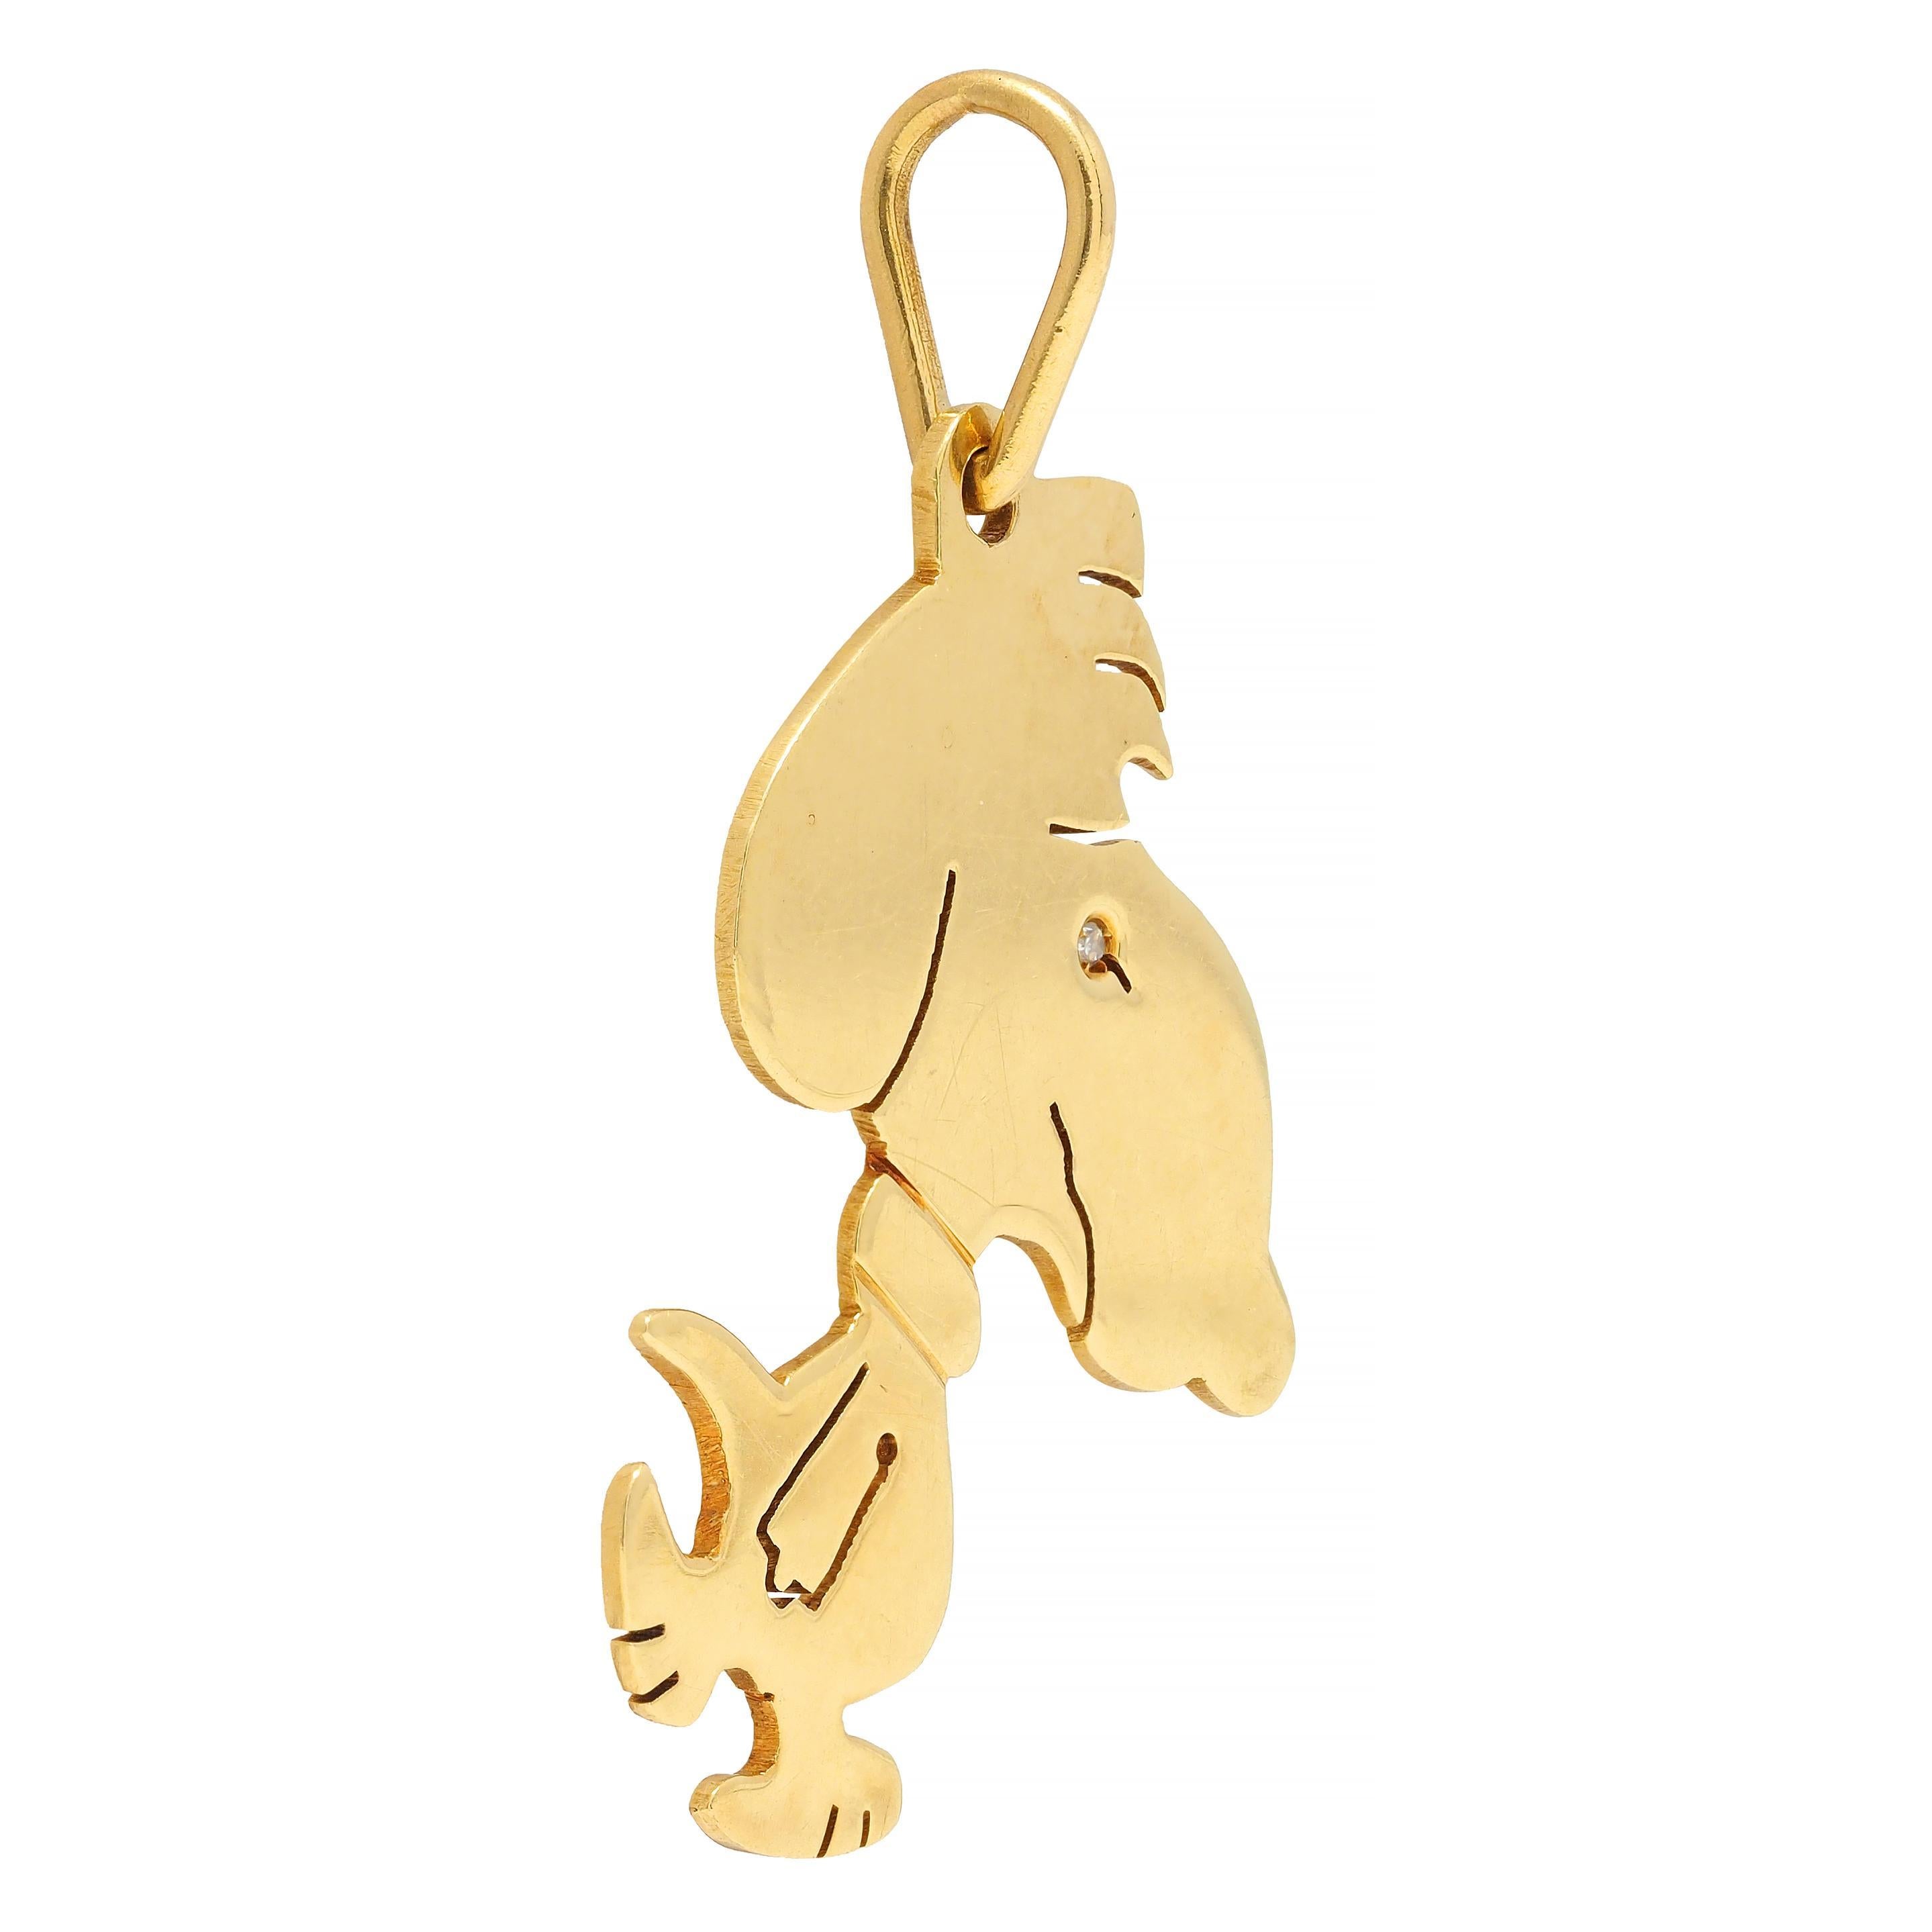 Designed as the cartoon character Snoopy in gold with pierced details 
Shown in profile with crooked smile, fluffed hair, and wearing a collar
Accented by a flush set single cut diamond eye 
Weighing approximately 0.01 carat - eye clean and